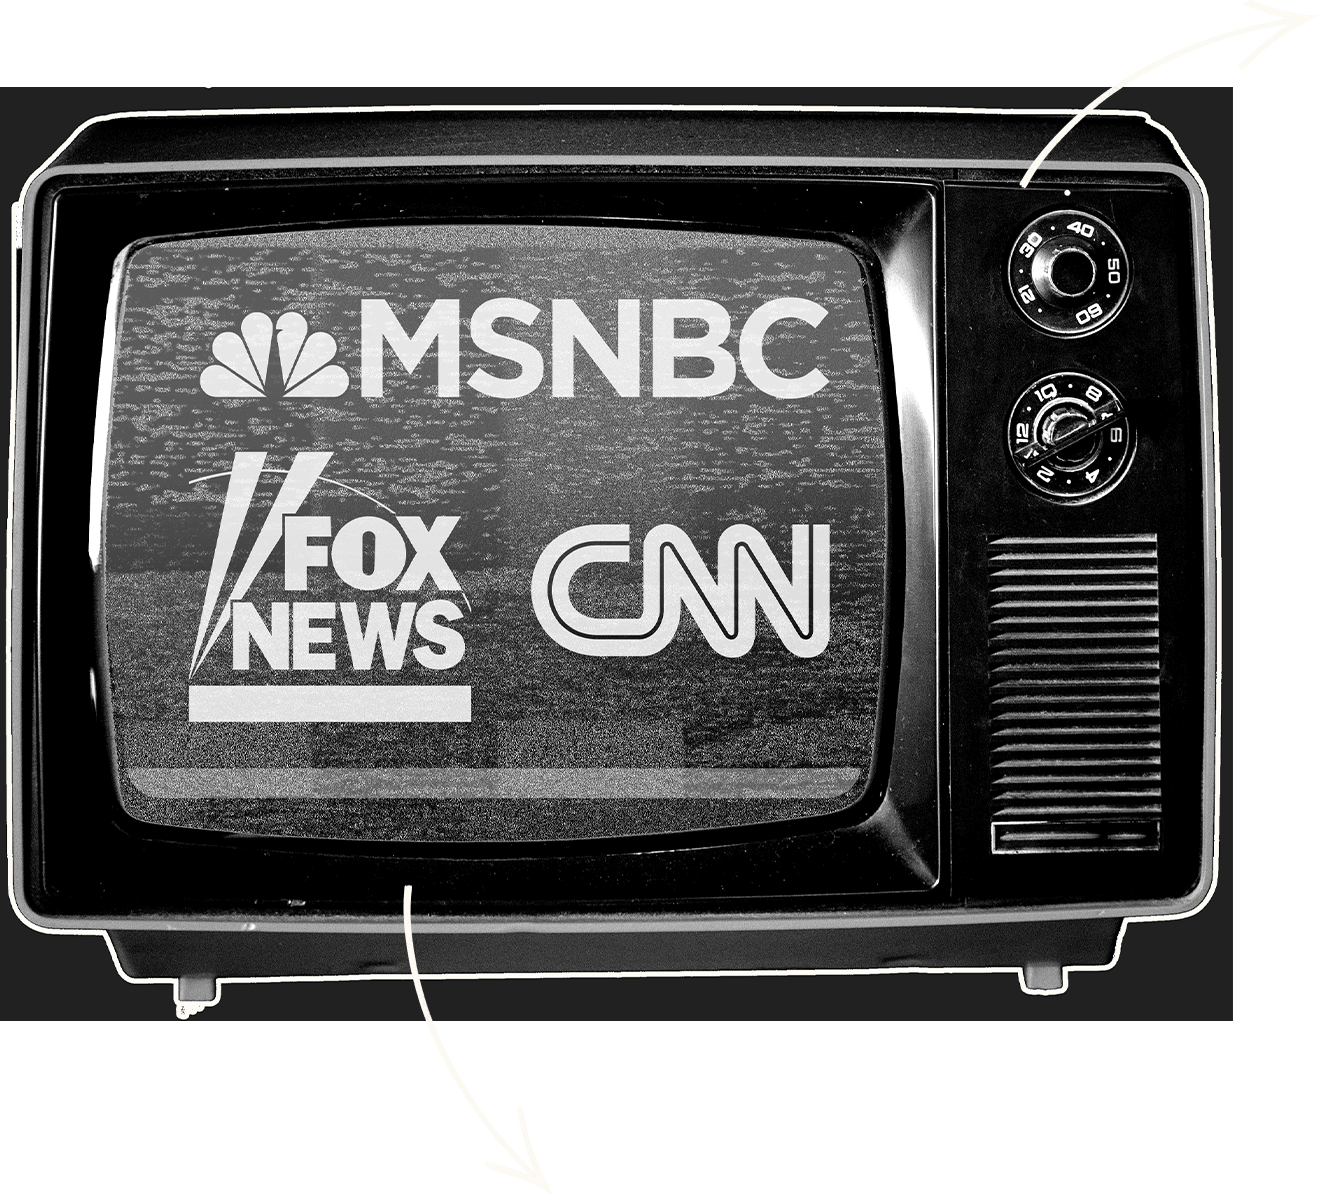 A vintage television with the logos of MSNBC, Fox News and CNN